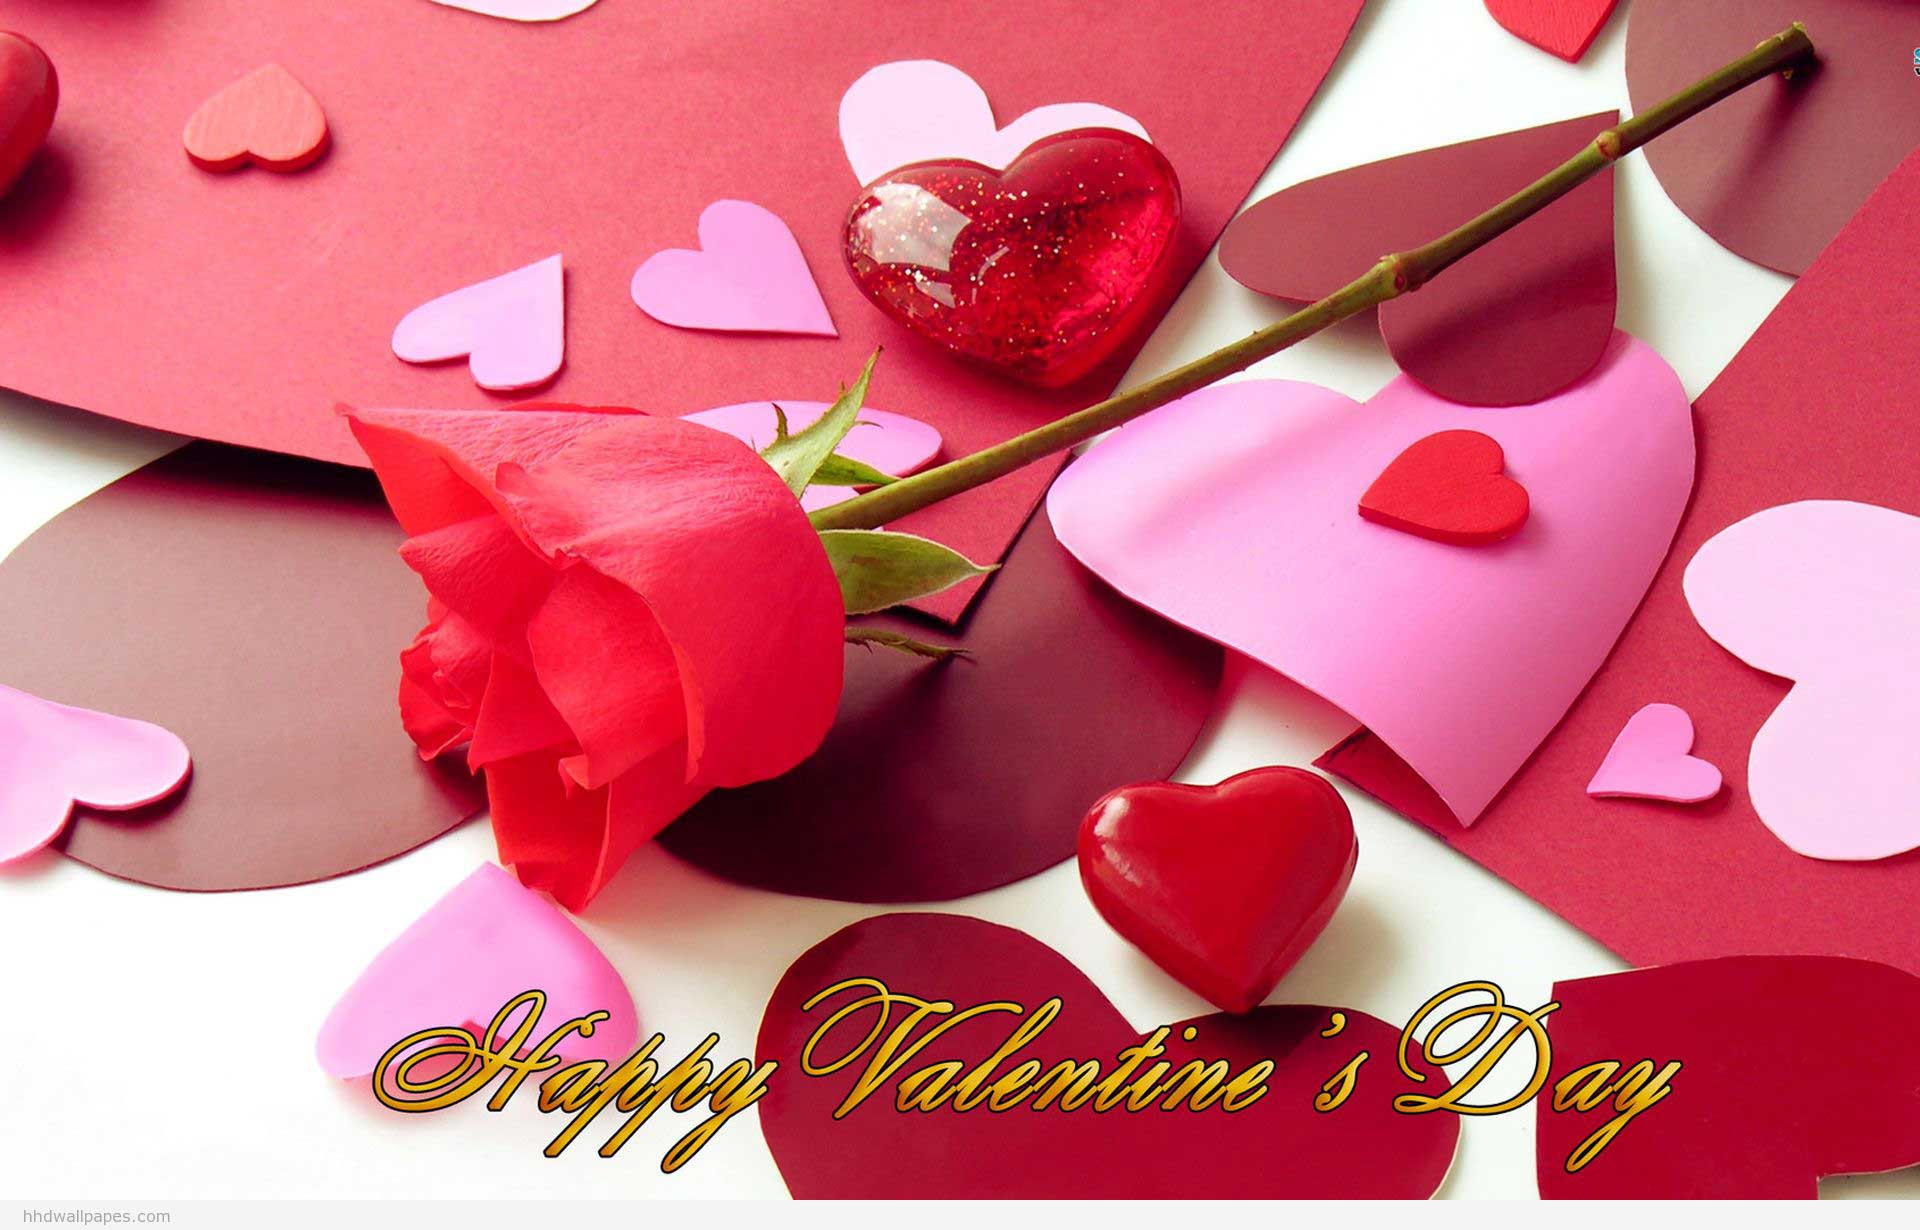 Valentines Day Image 2021 and HD Wallpaper